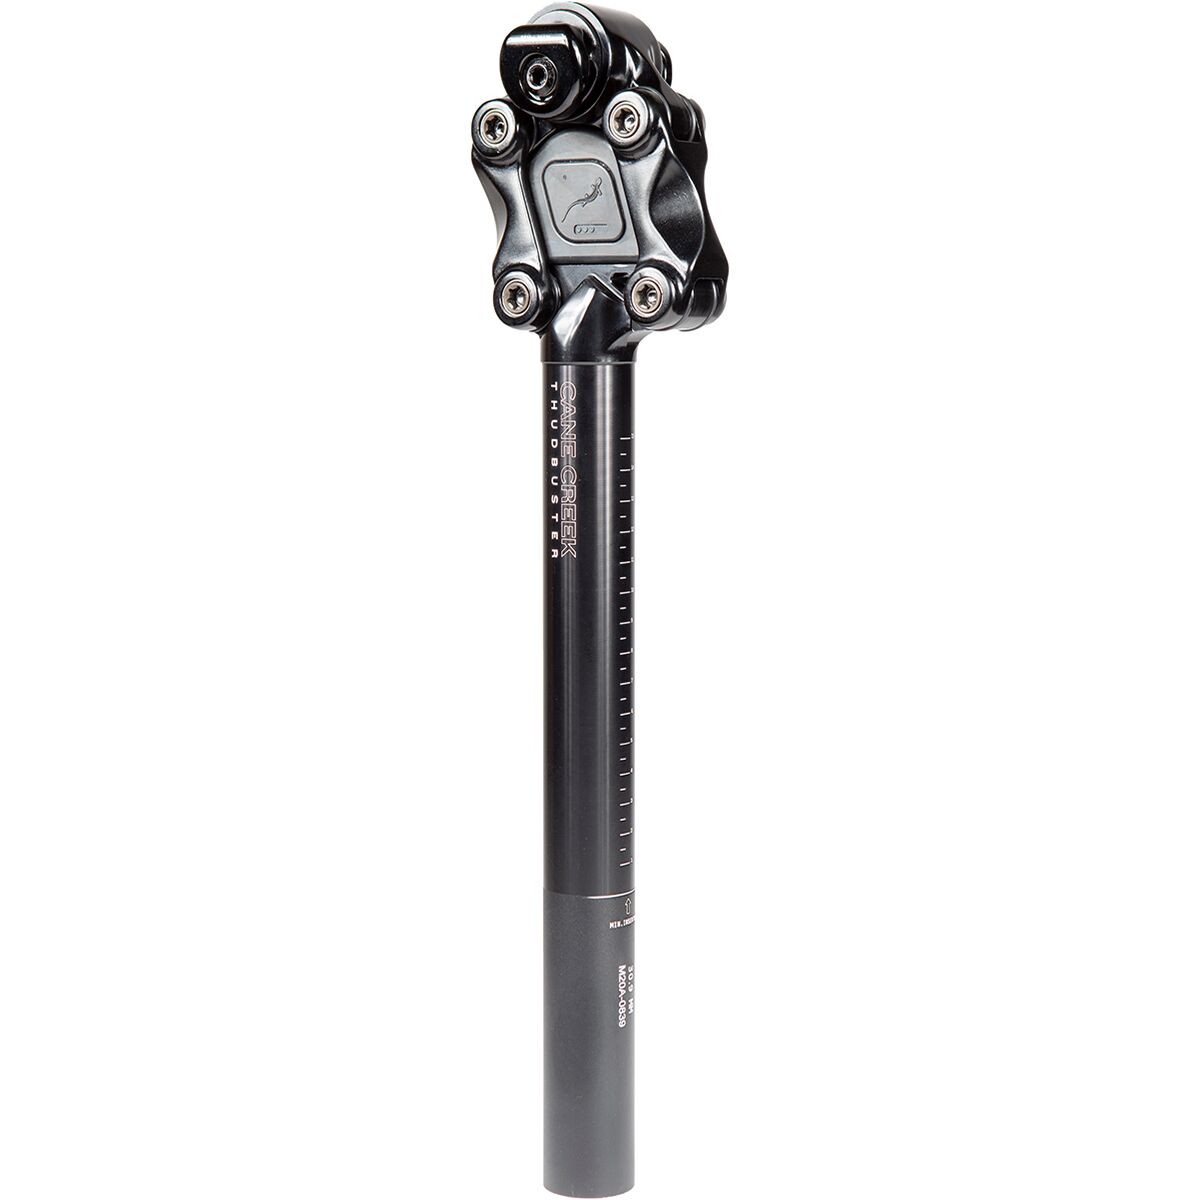 Cane Creek Thudbuster ST Seatpost